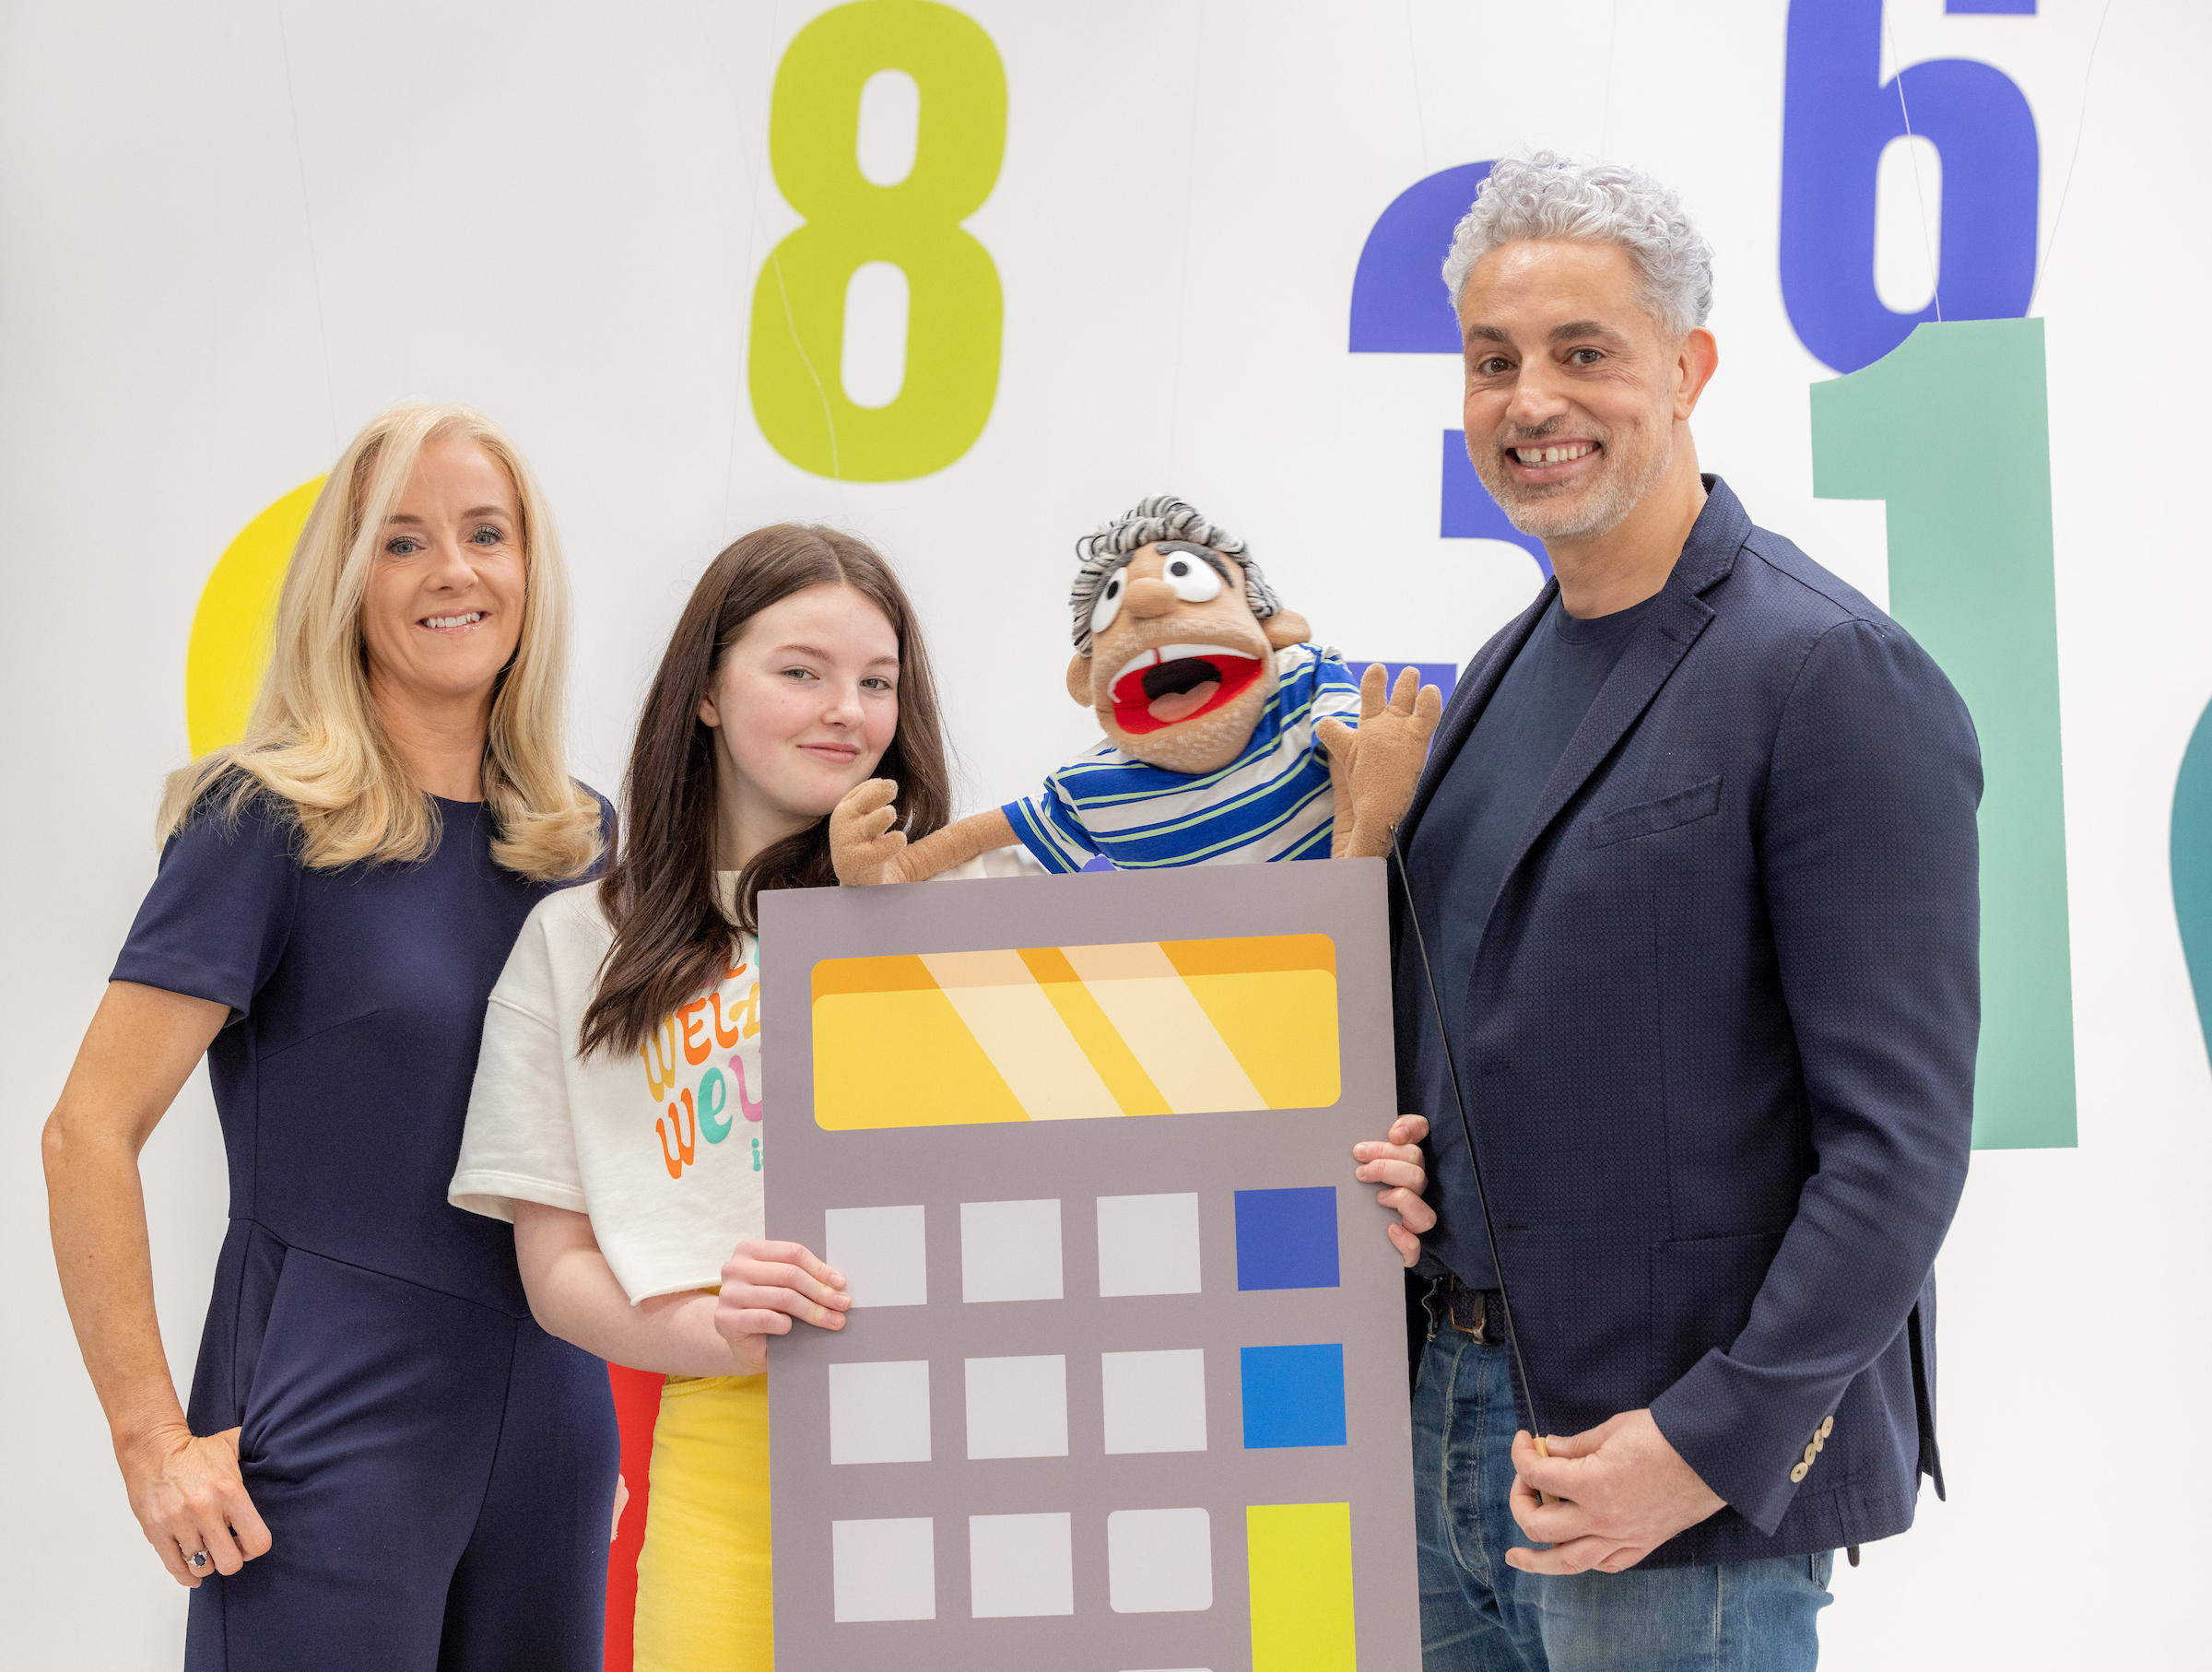 Bank of Ireland’s Financial Literacy campaign